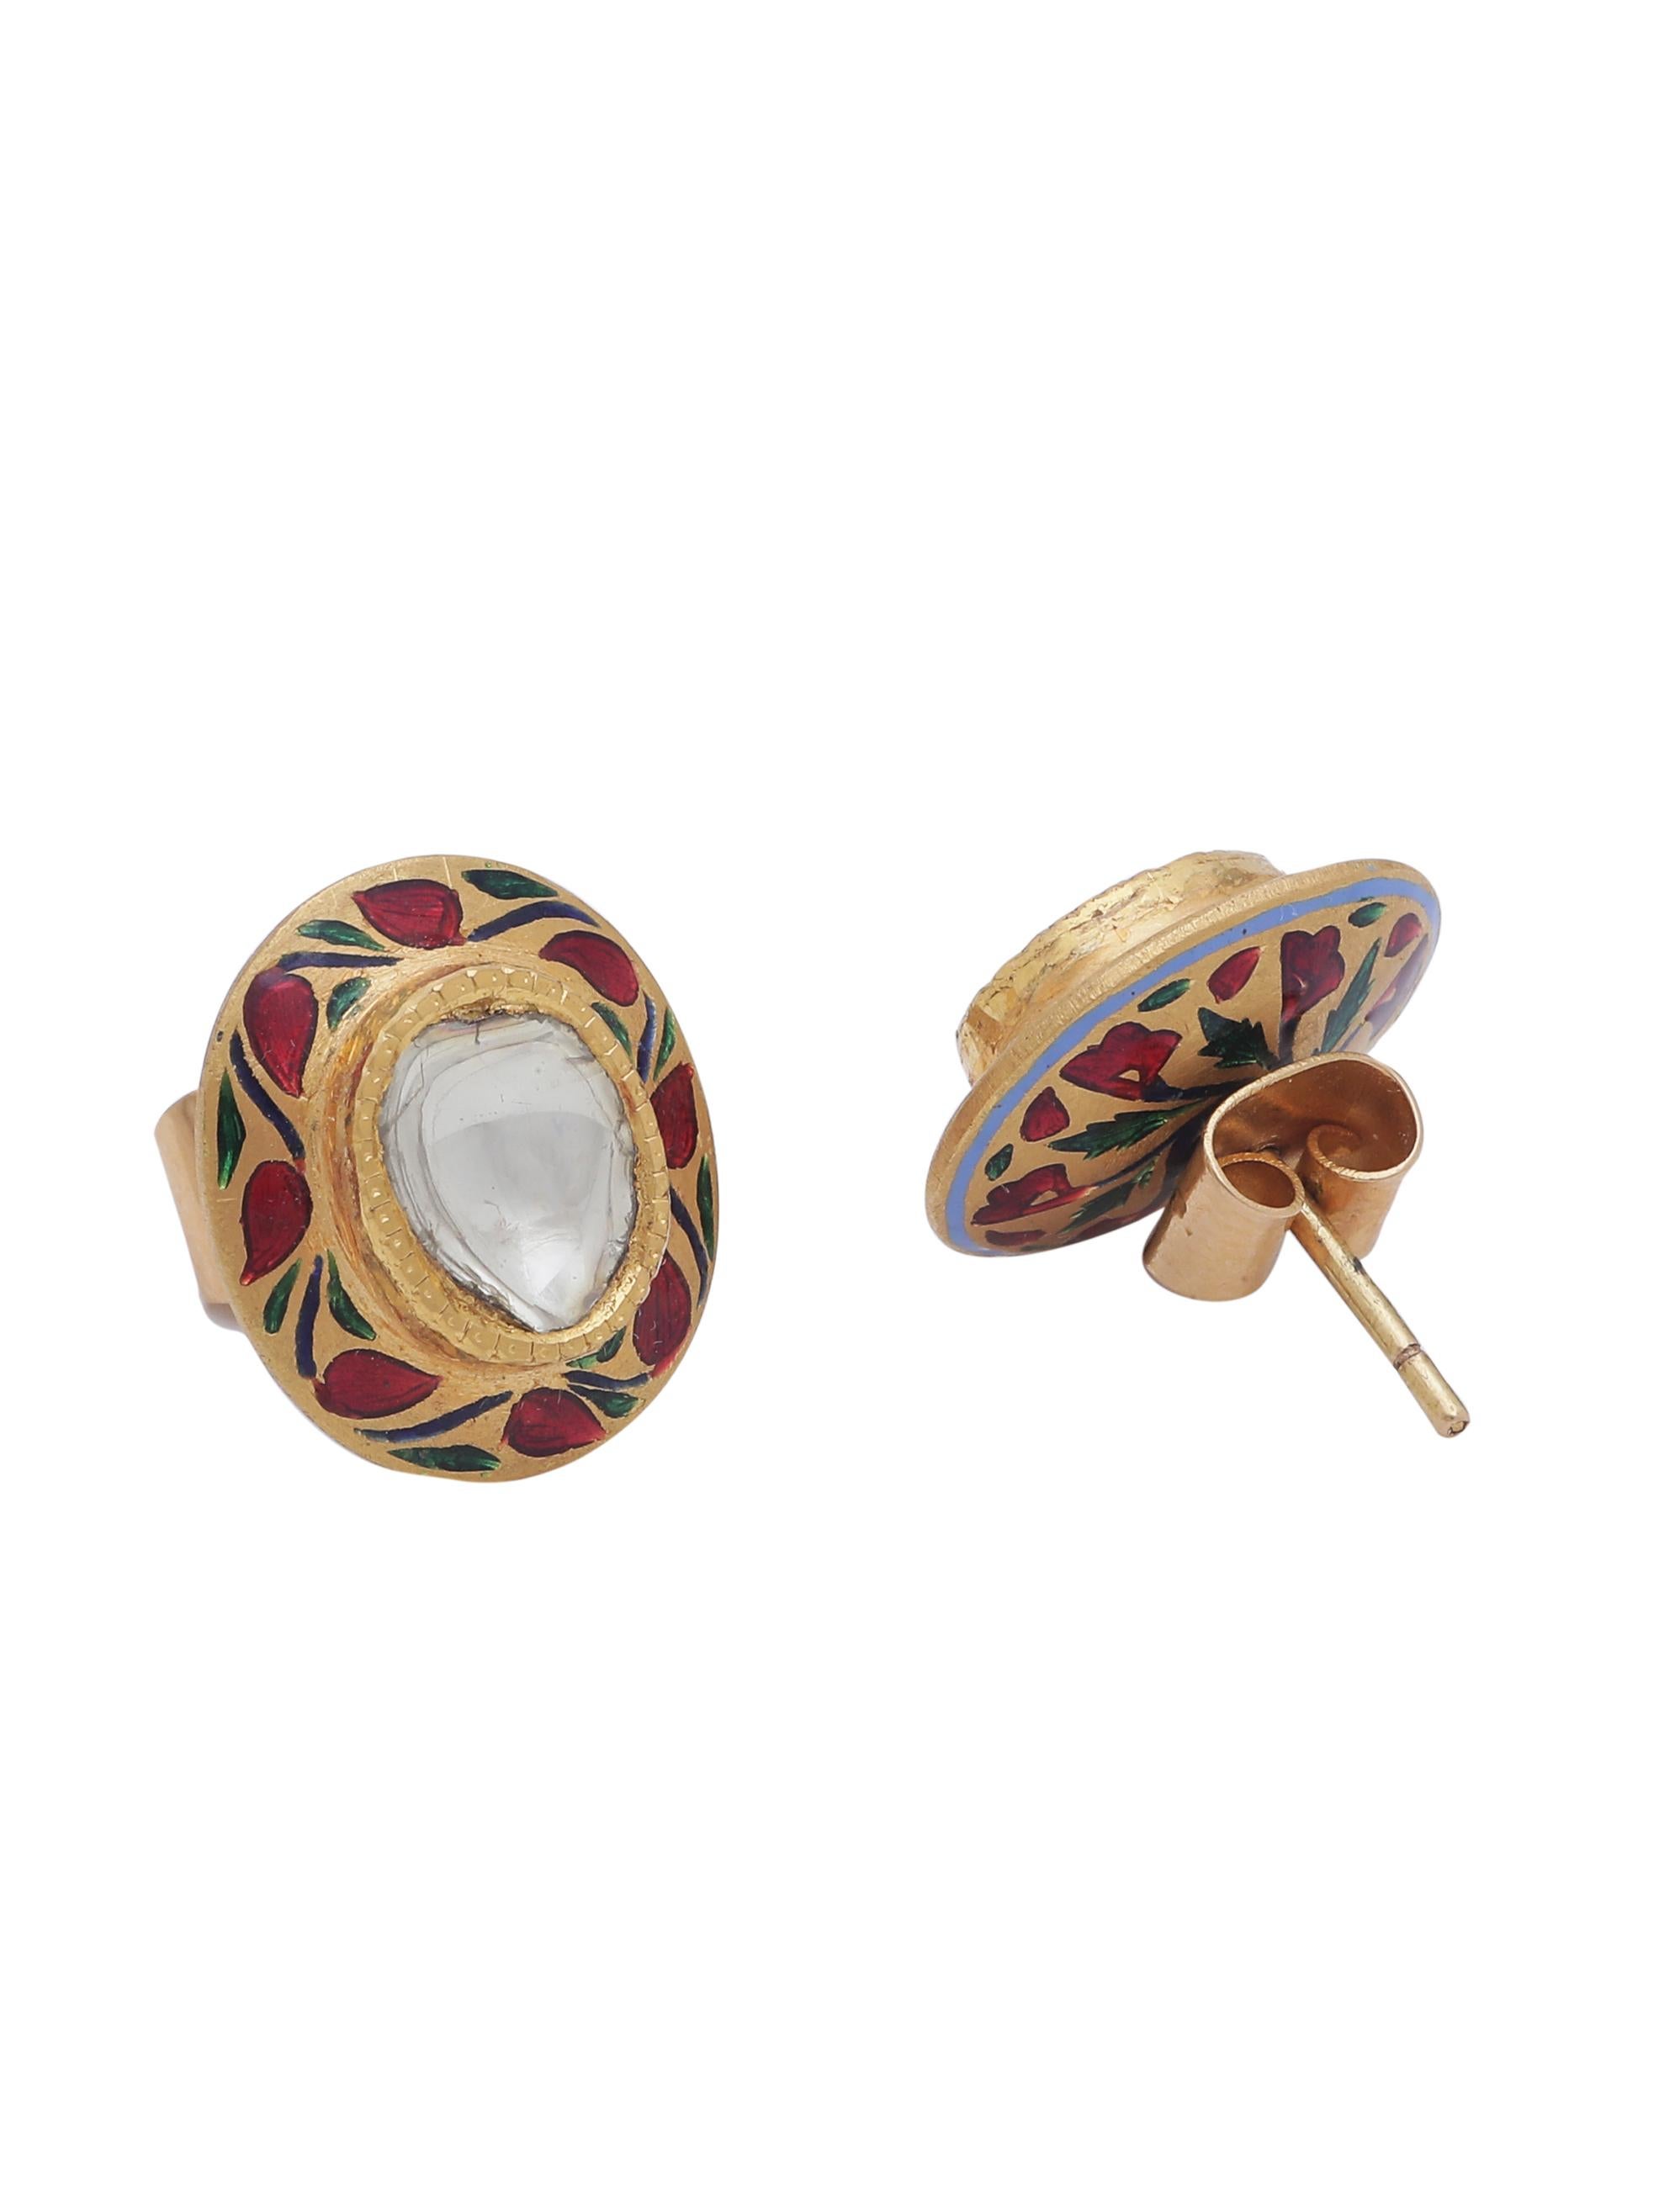 A pair of beautiful Flat diamond earring with enamel all around and at the back.
The intricate enamel work called 